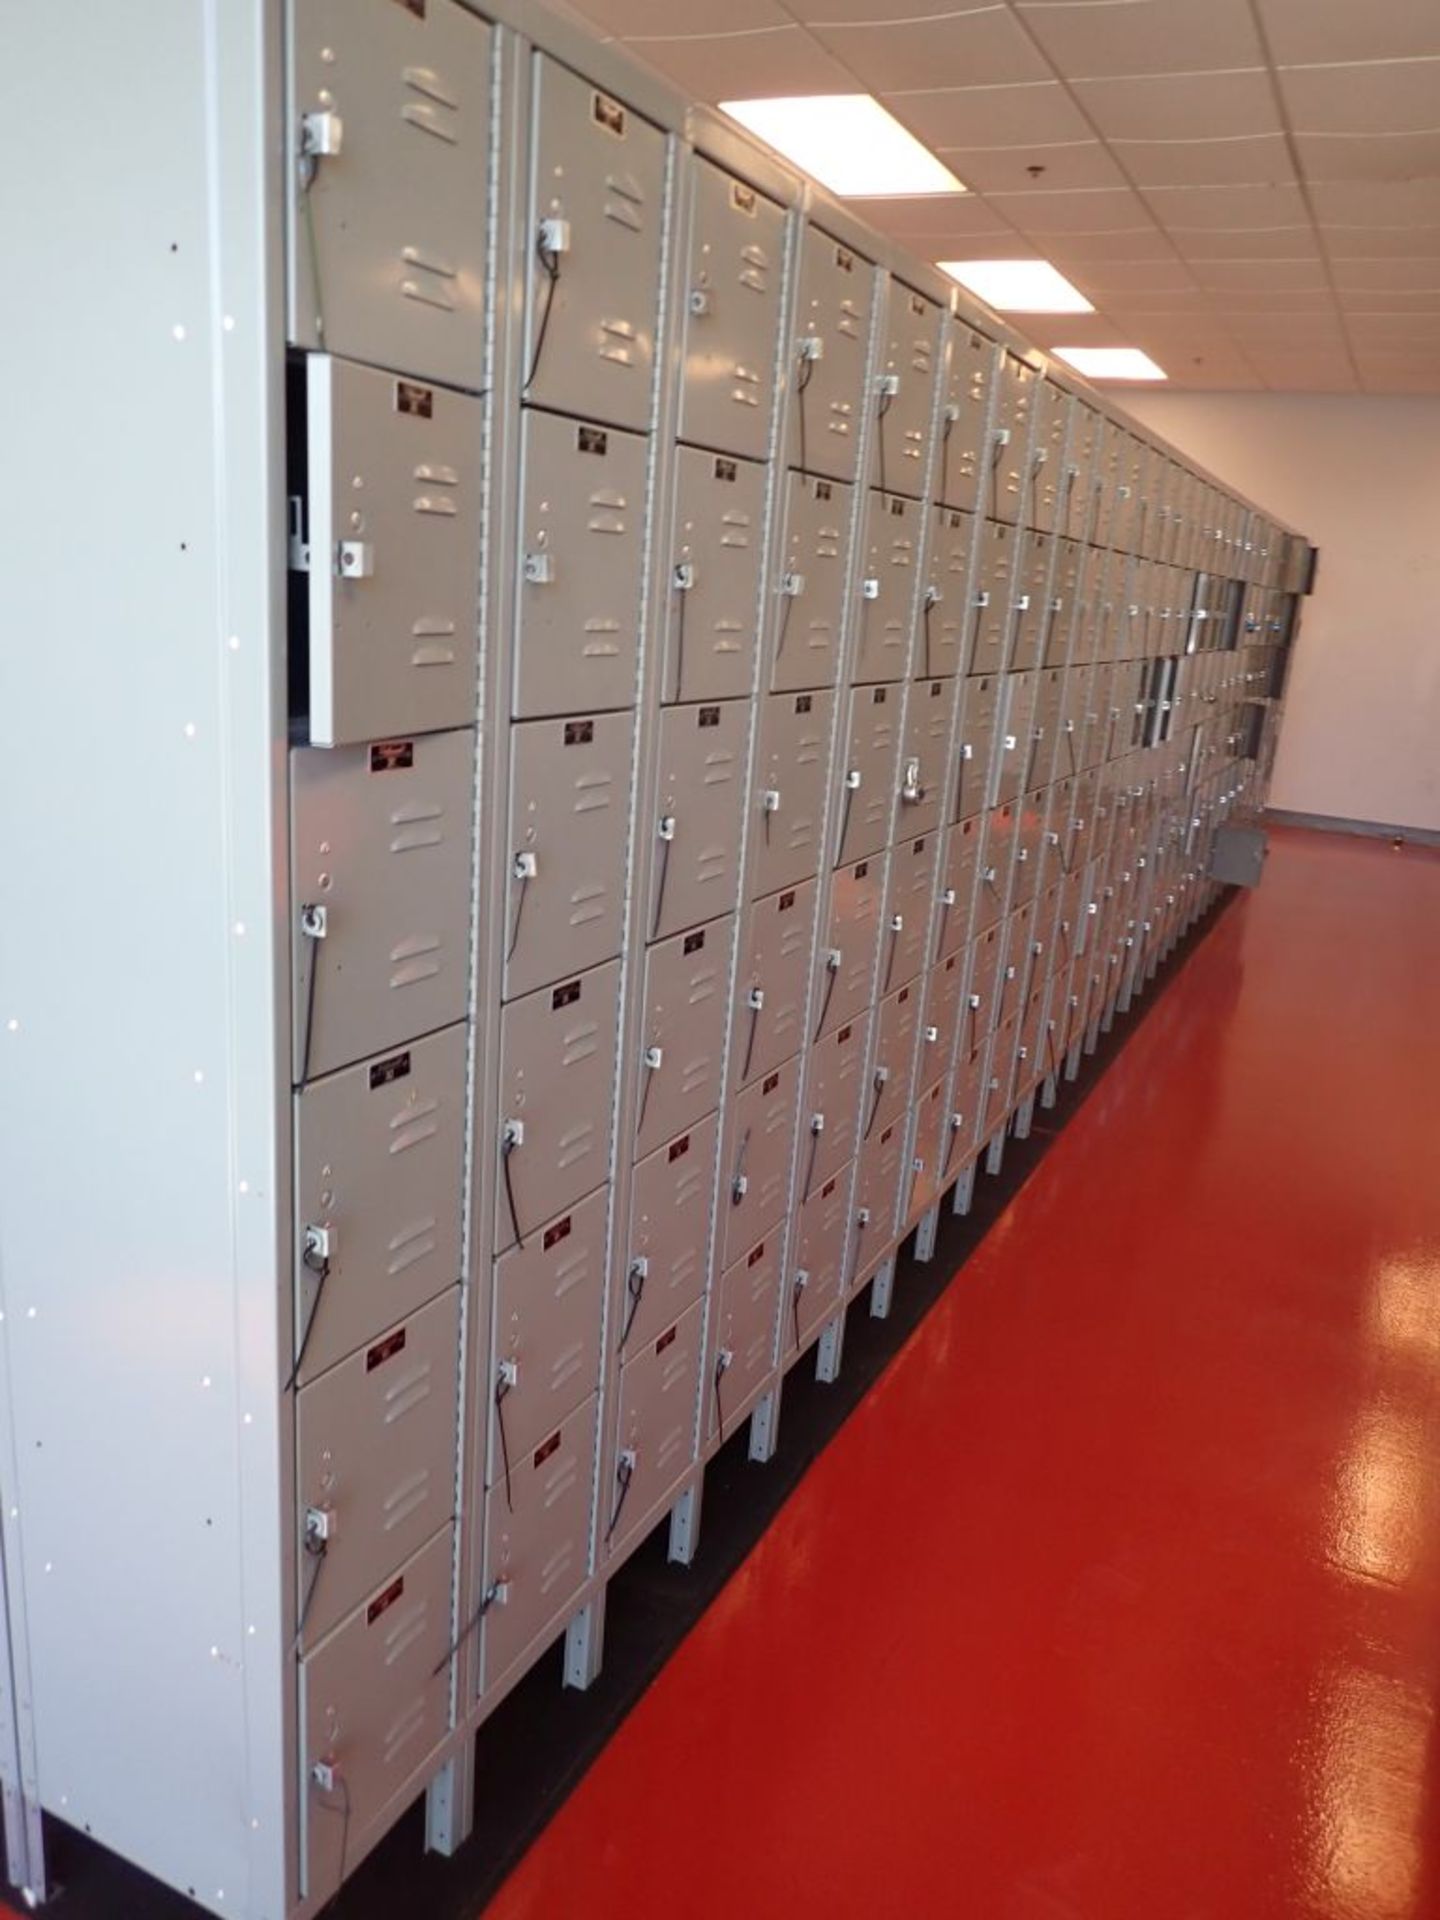 Lot of (10) Sections of Hallowell Lockers - Image 3 of 4